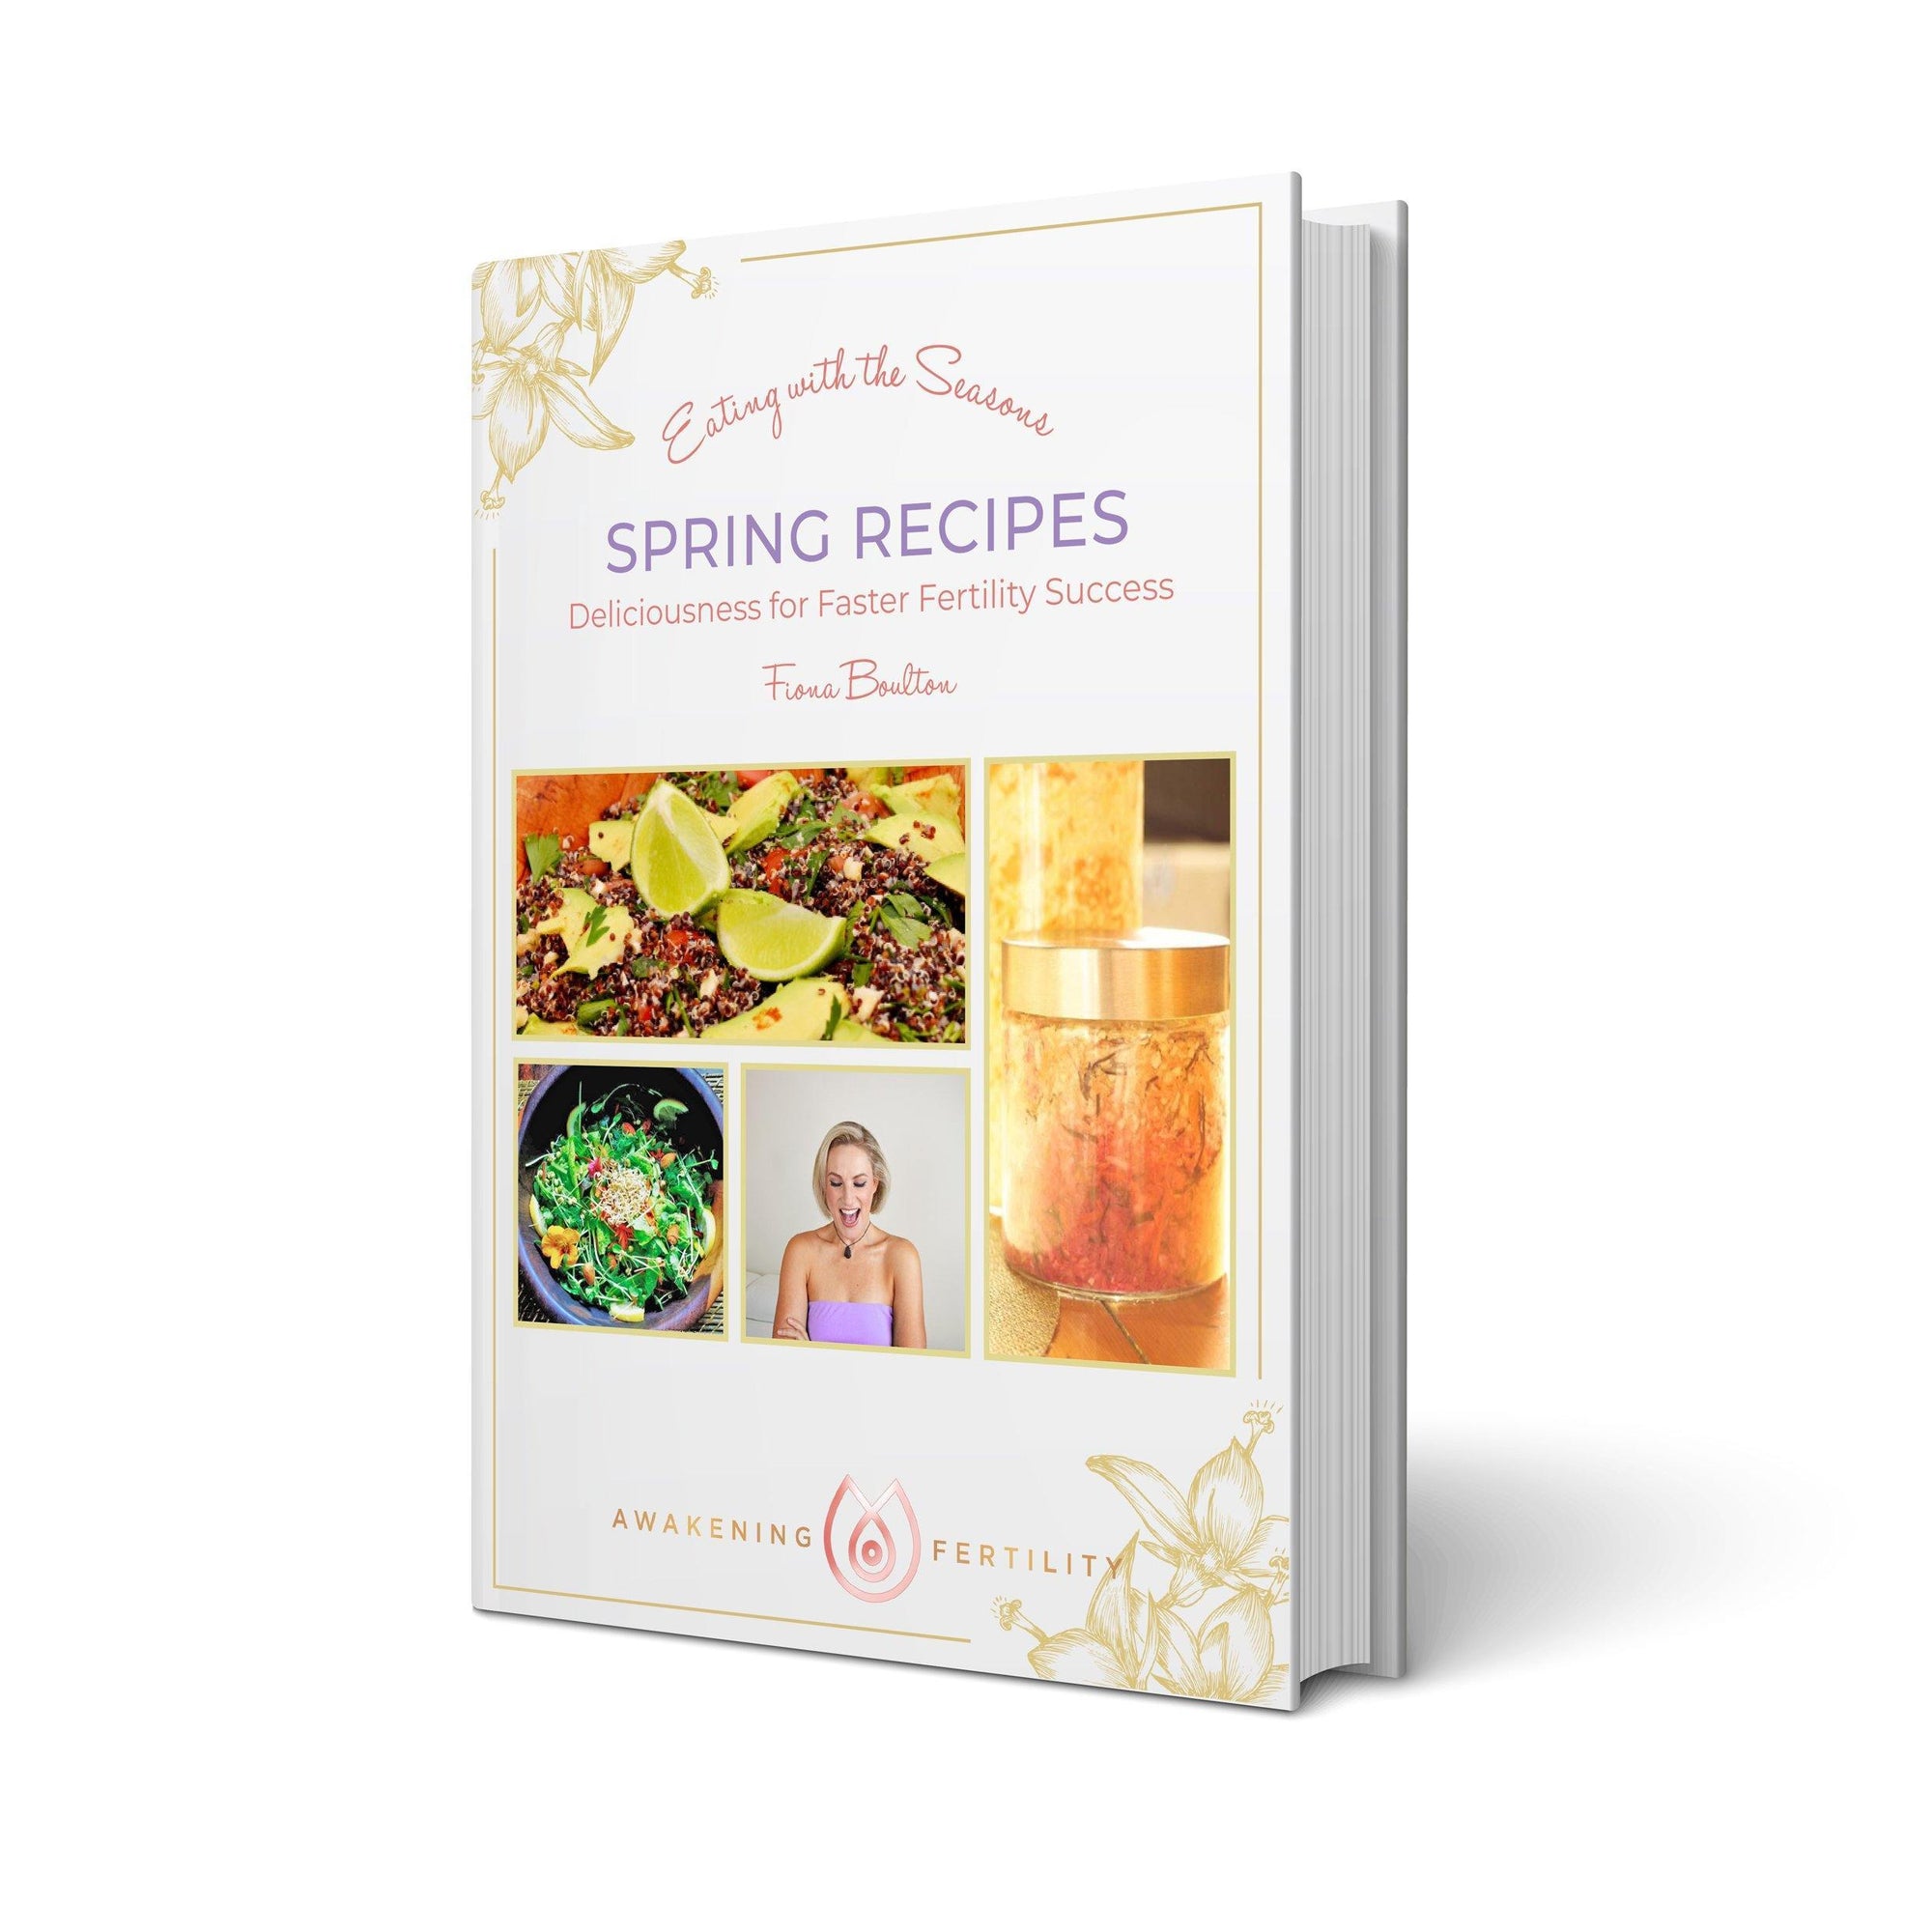 Eating with the Seasons - Spring Recipes - Deliciousness for Faster Fertility Success eBook - Powerfully Pure